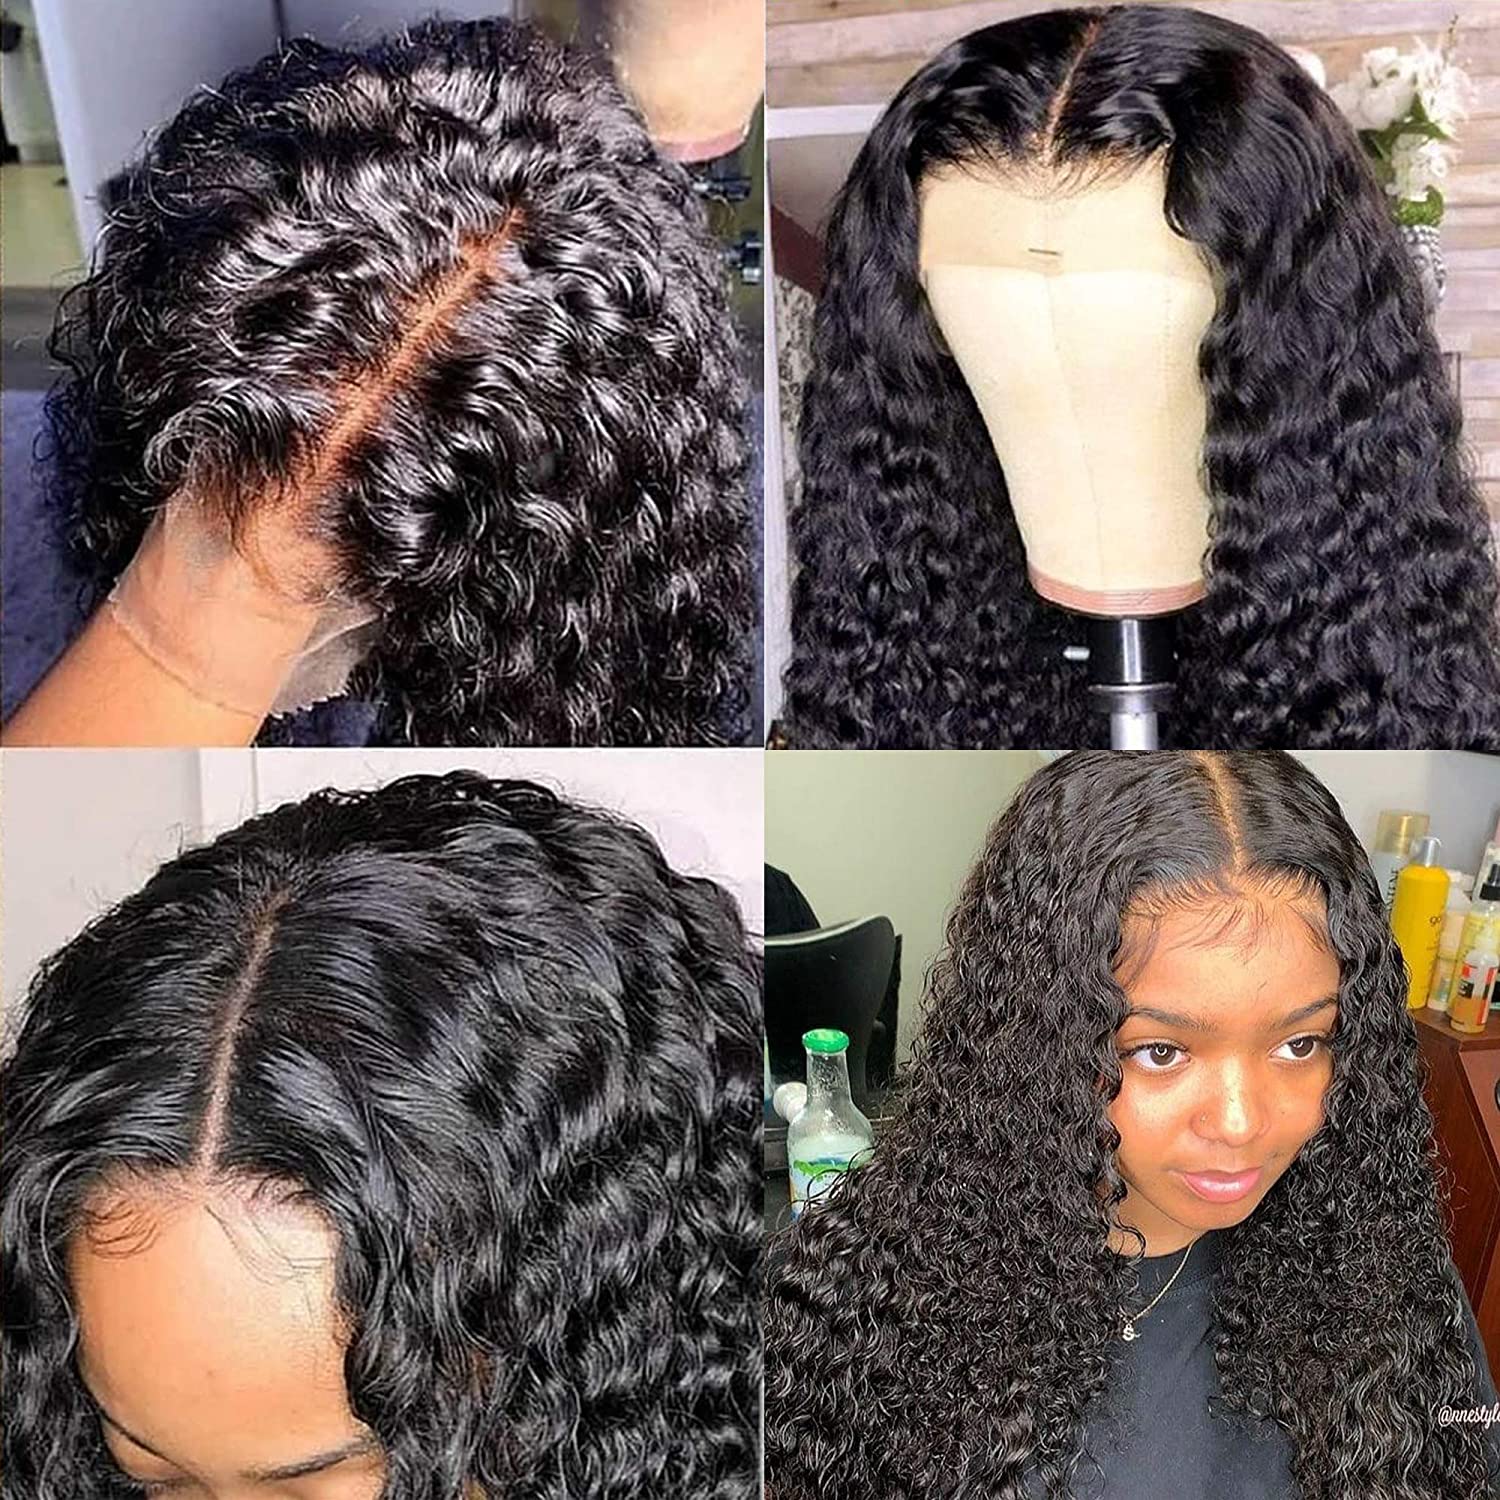 Free Shipping Gluna Hair 4x4/5x5 Lace Closure Wigs Deep Curly Wet and Wavy Brazilian Virgin Human Hair Lace Closure Wigs For Black Women With Pre Plucked Natural Color Hairline